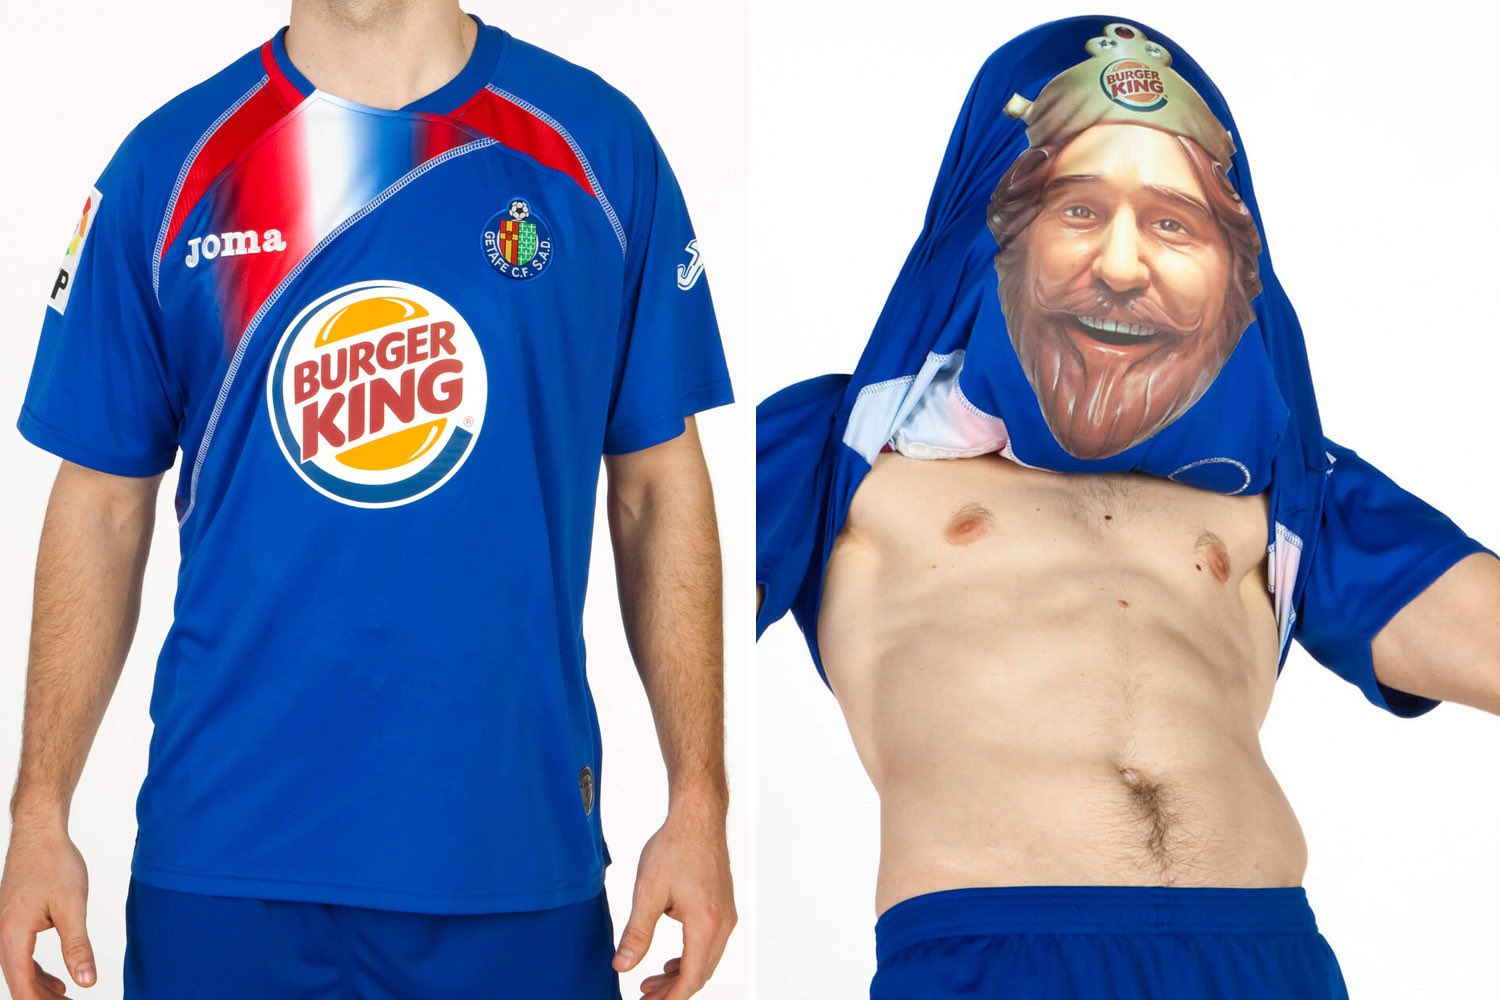 MC on Twitter: "@classicshirts The Getafe Burger King one  https://t.co/27NmlwGsaf" / Twitter